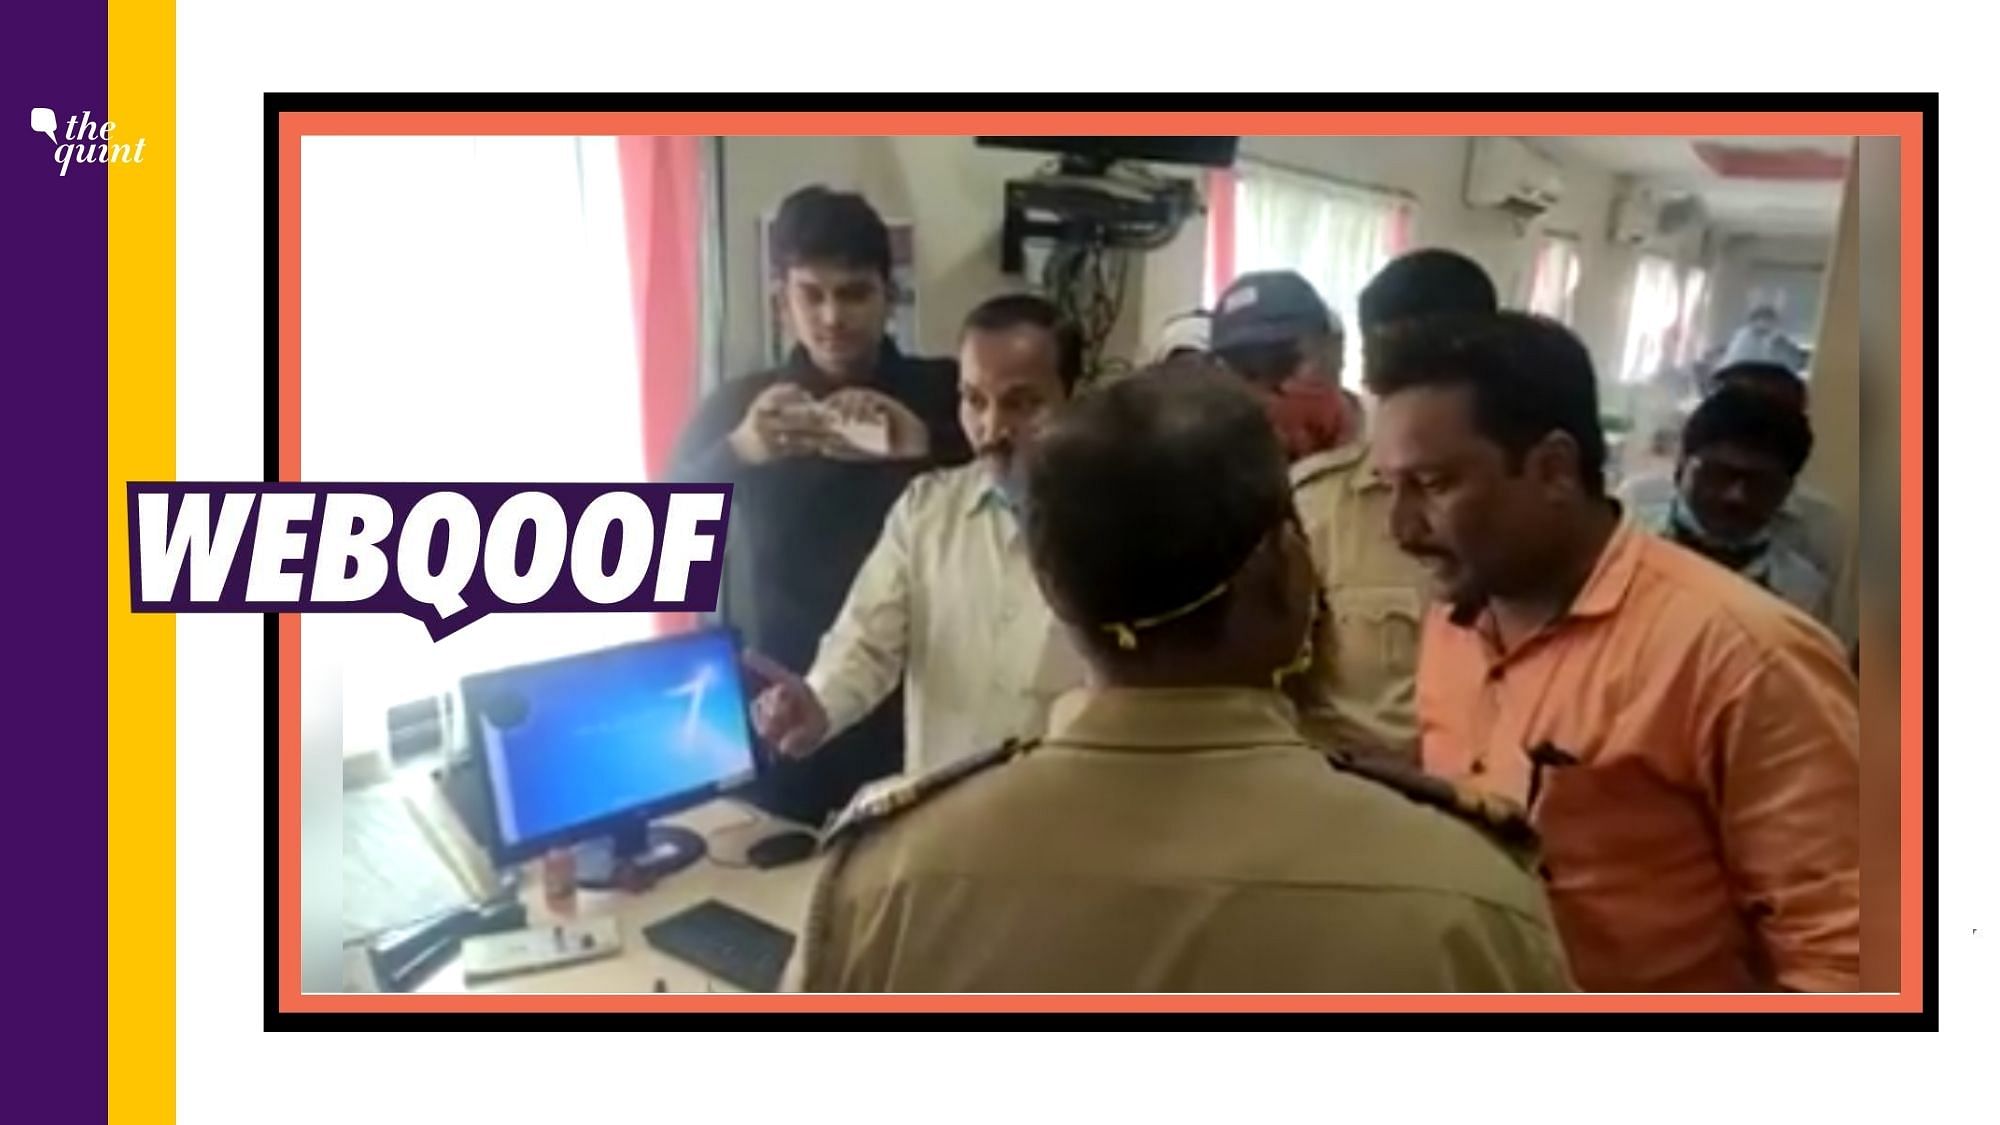 The video is being shared with the false claim that Shiv Sena workers attacked IDBI bank manager, when in reality, the assaulters are from Youth Congress.